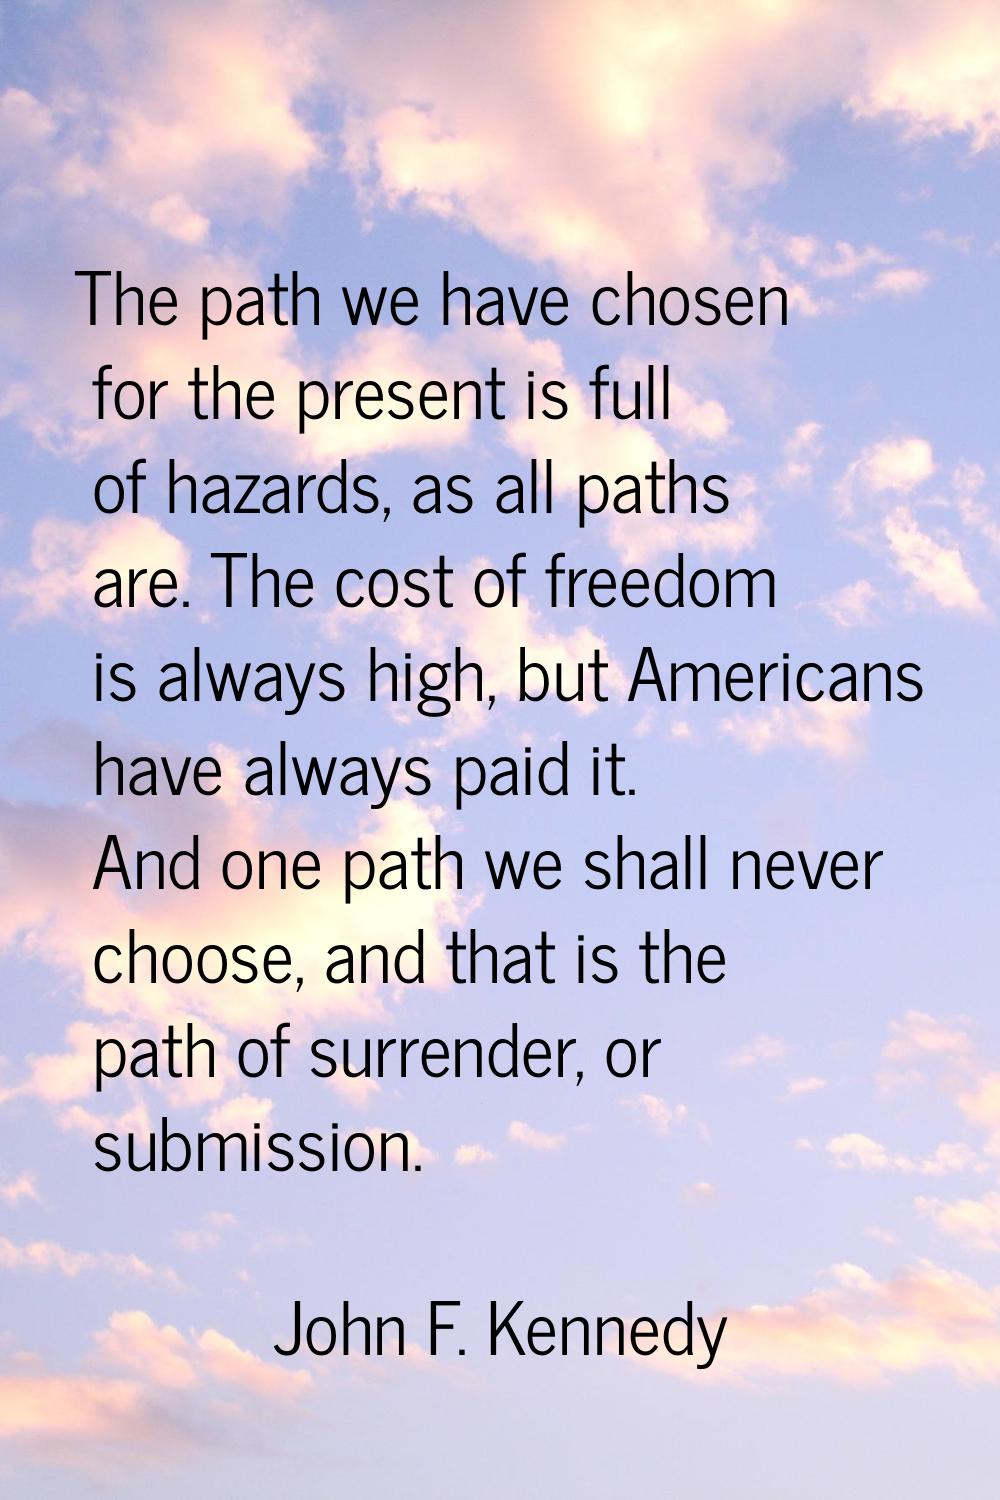 The path we have chosen for the present is full of hazards, as all paths are. The cost of freedom i